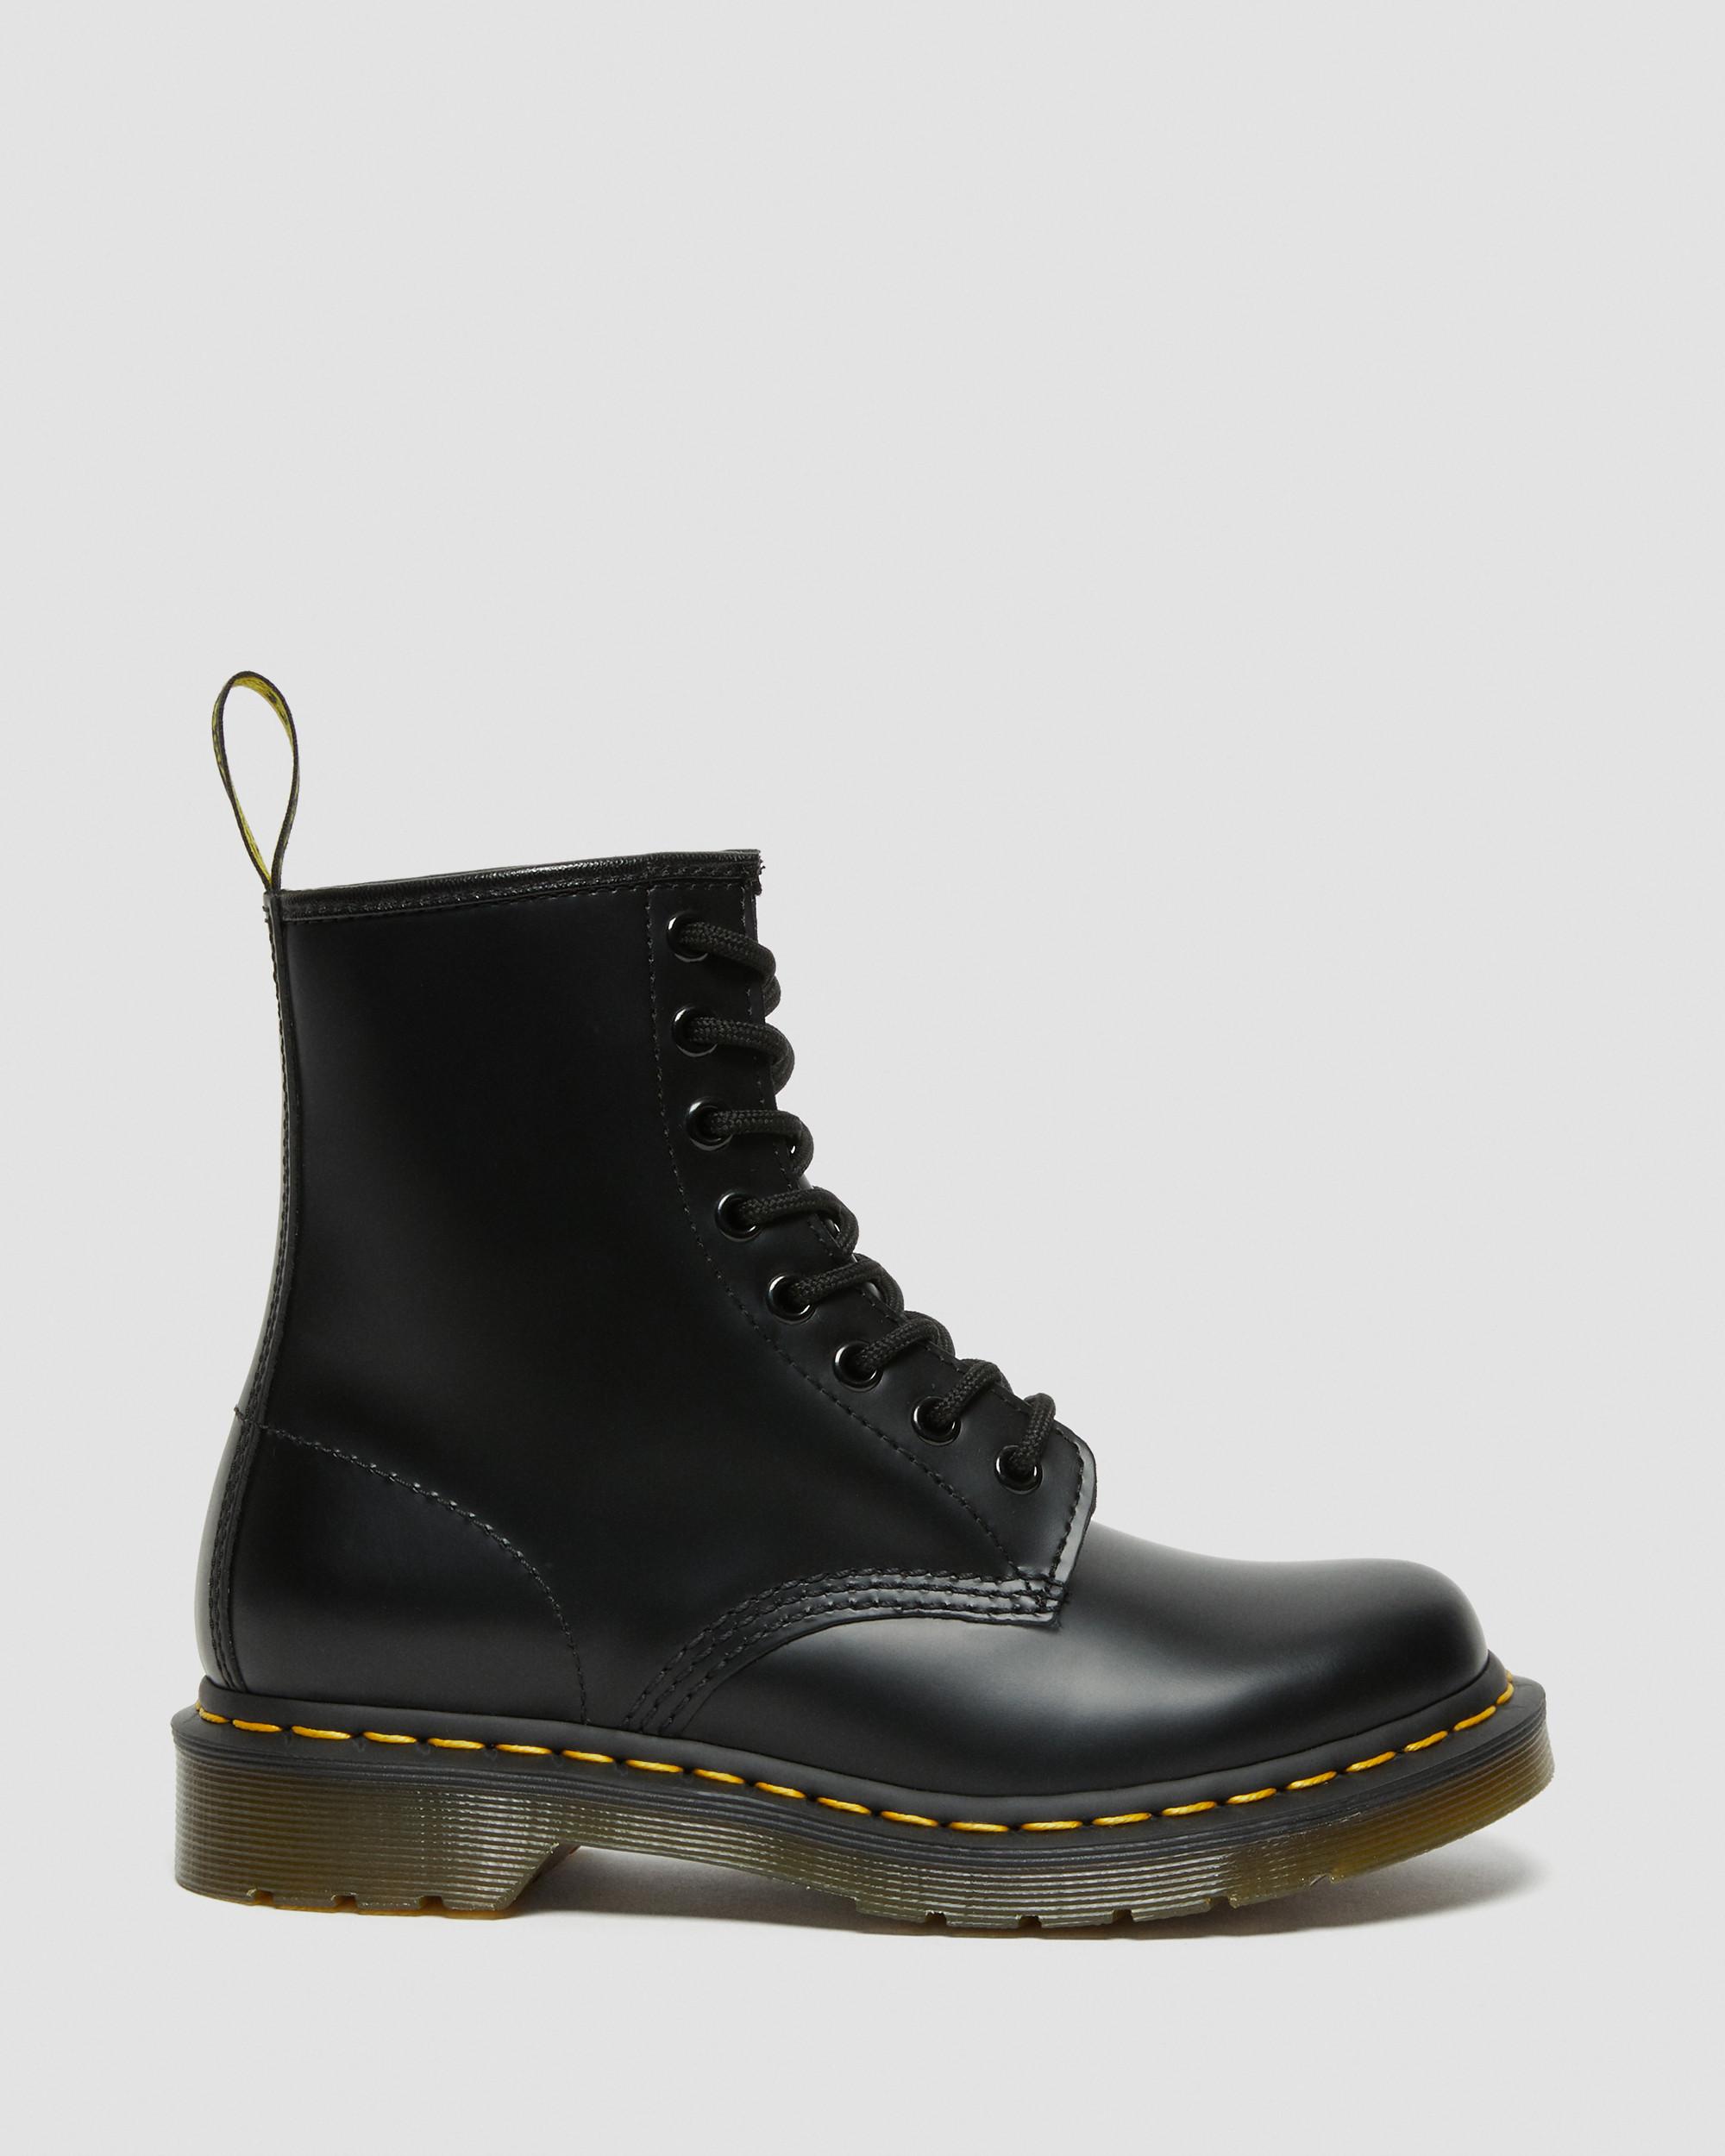 Why Doc Martens Boots Are so Expensive